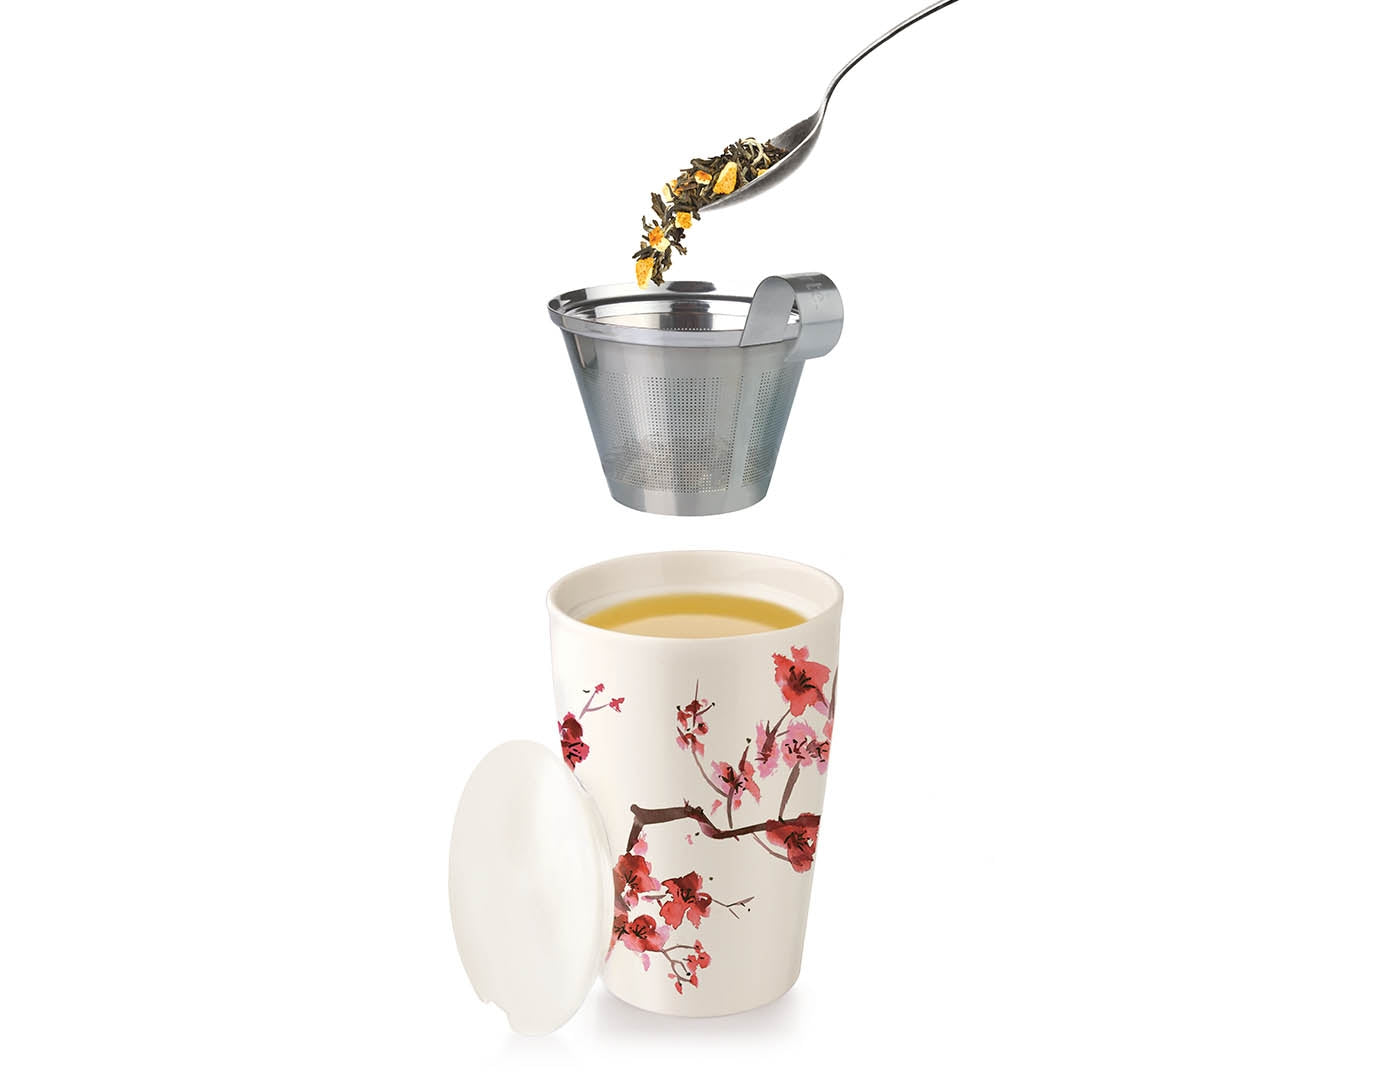 Cherry Blossom design KATI® Steeping cup with infuser showing stainless steel infuser with tea leaves